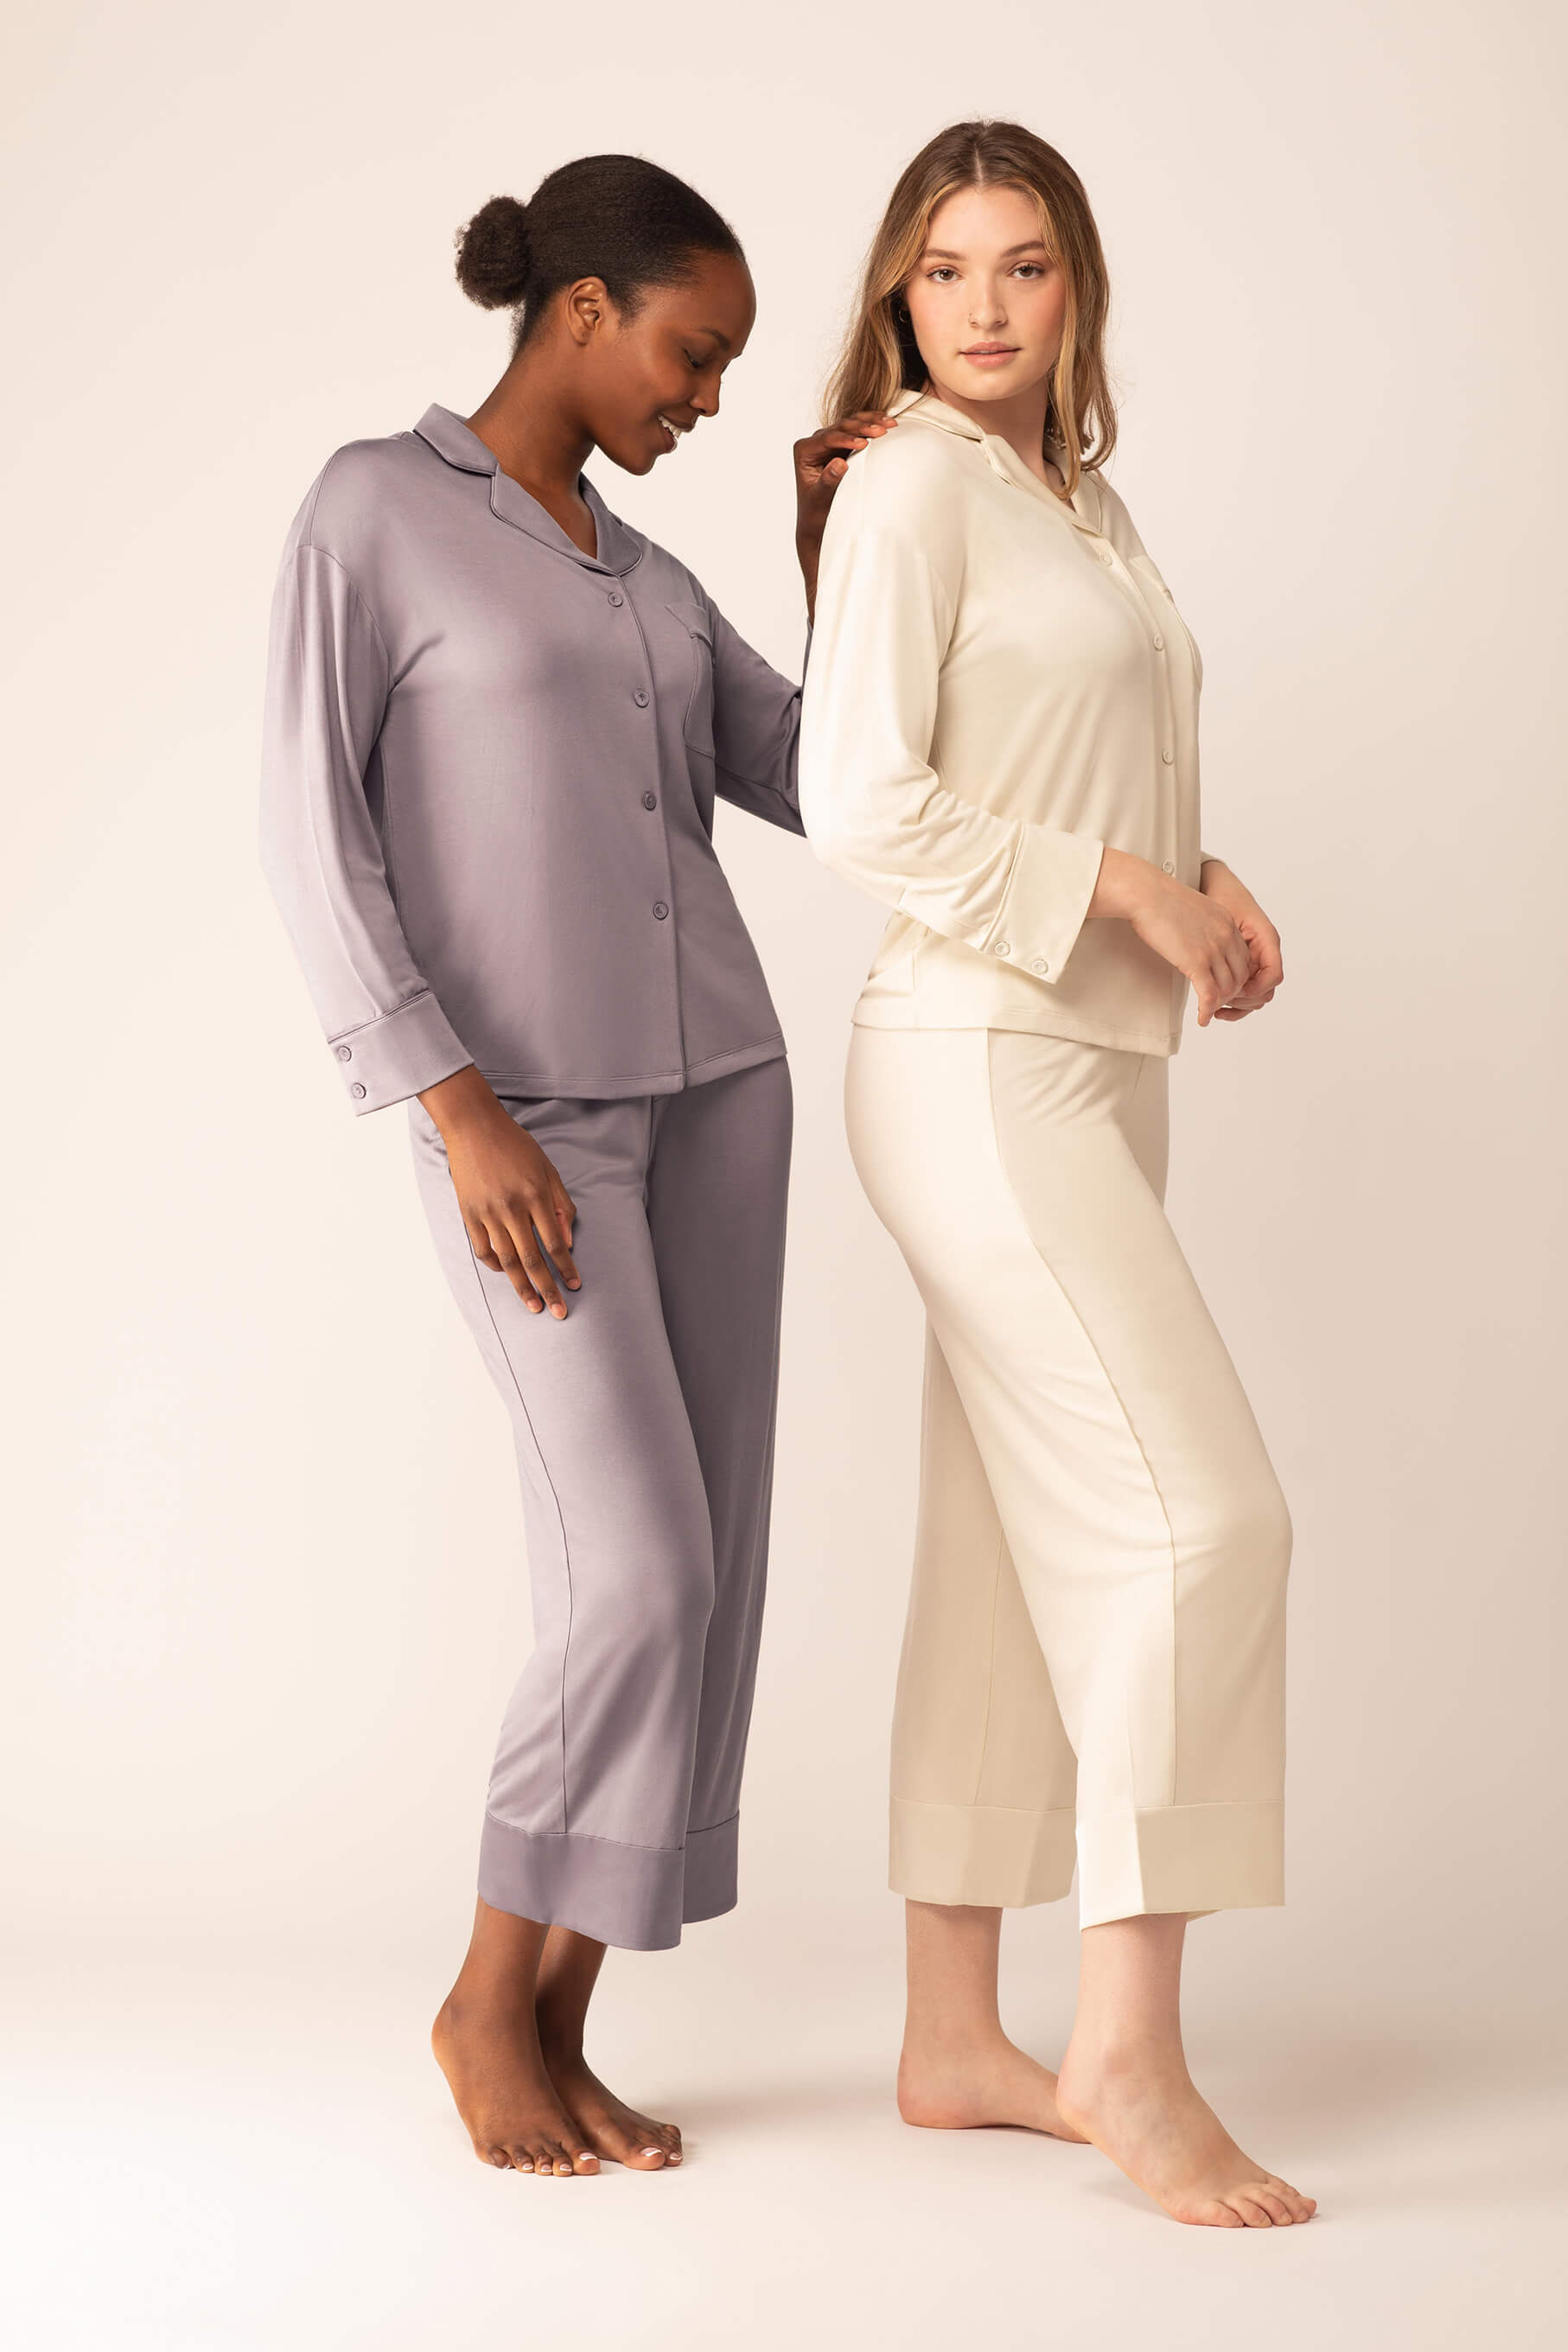 One woman wearing light purple button up pajama shirt with pocket and matching pajama pants next to another woman wearing off-white version of same pajama set